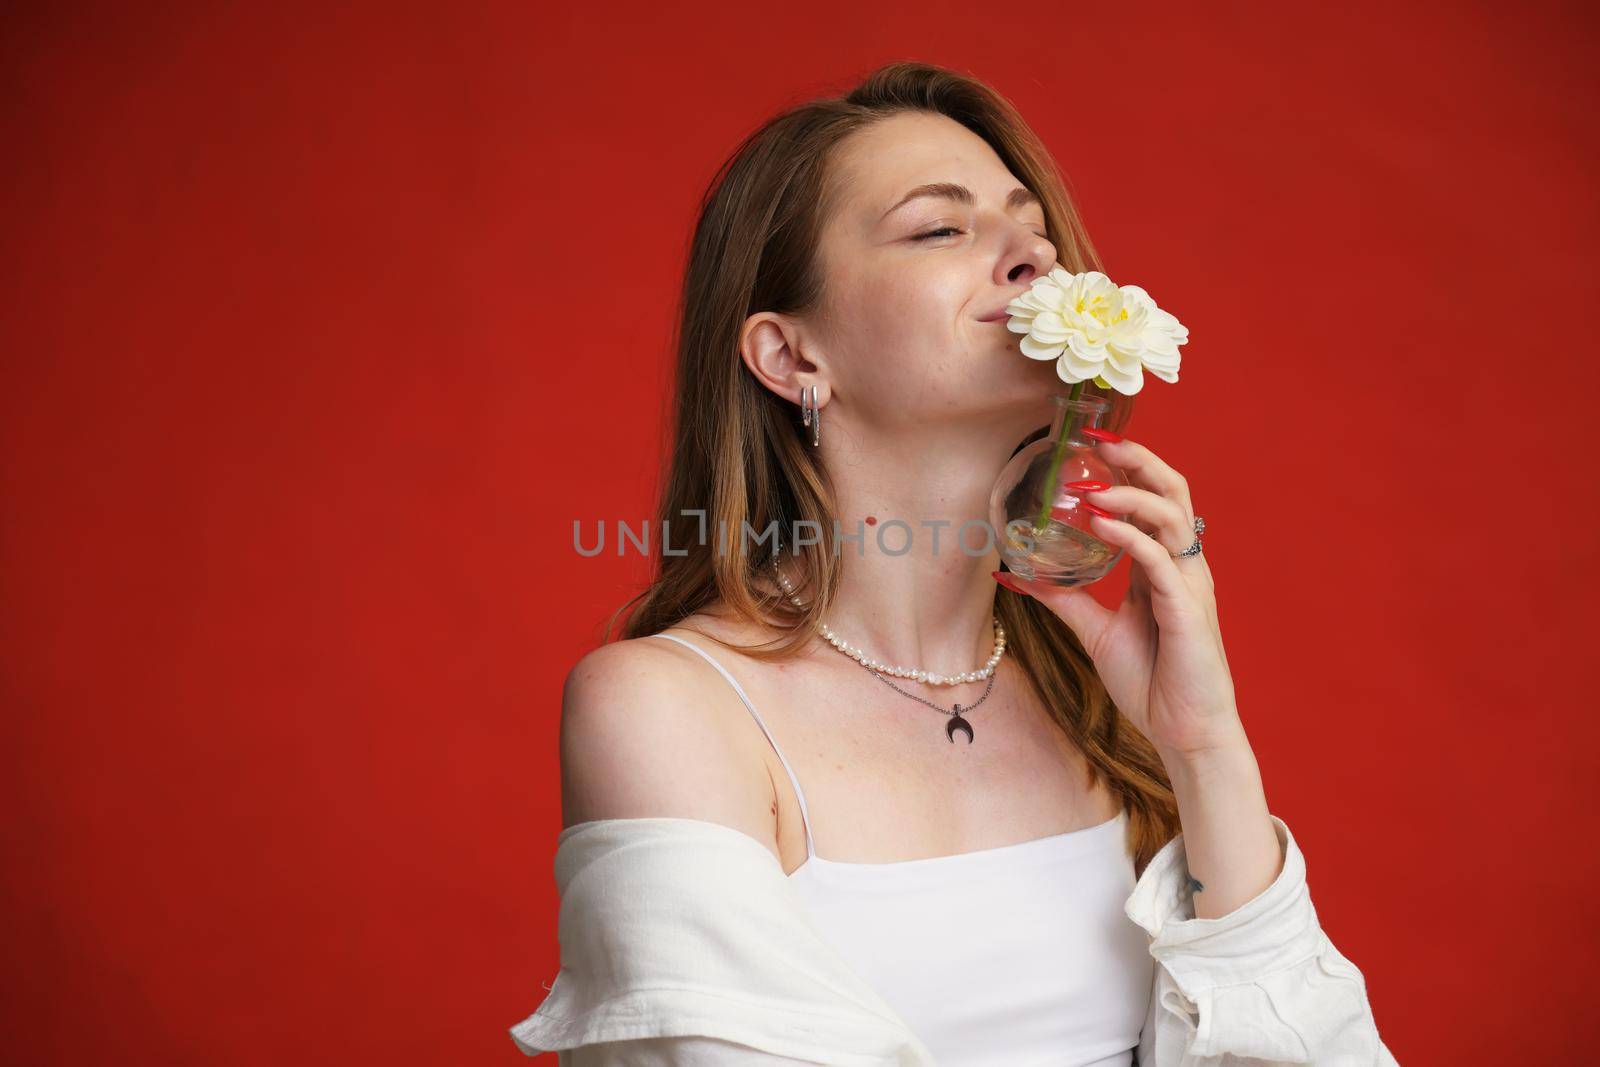 Young model in white shirt posing with flower with smile on red background by chichaevstudio